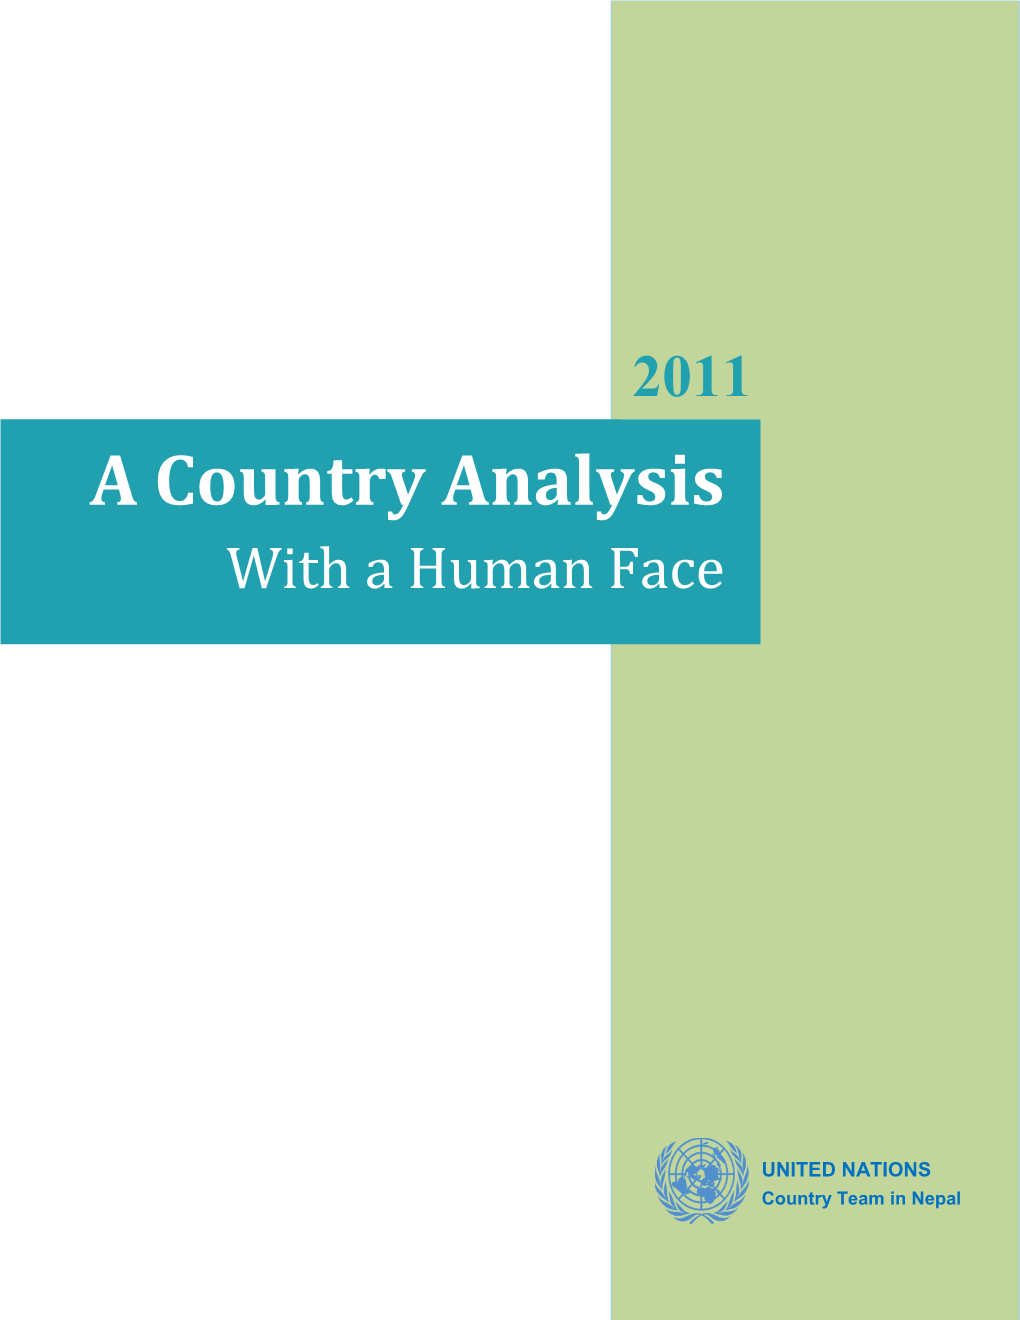 Country Analysis with a Human Face